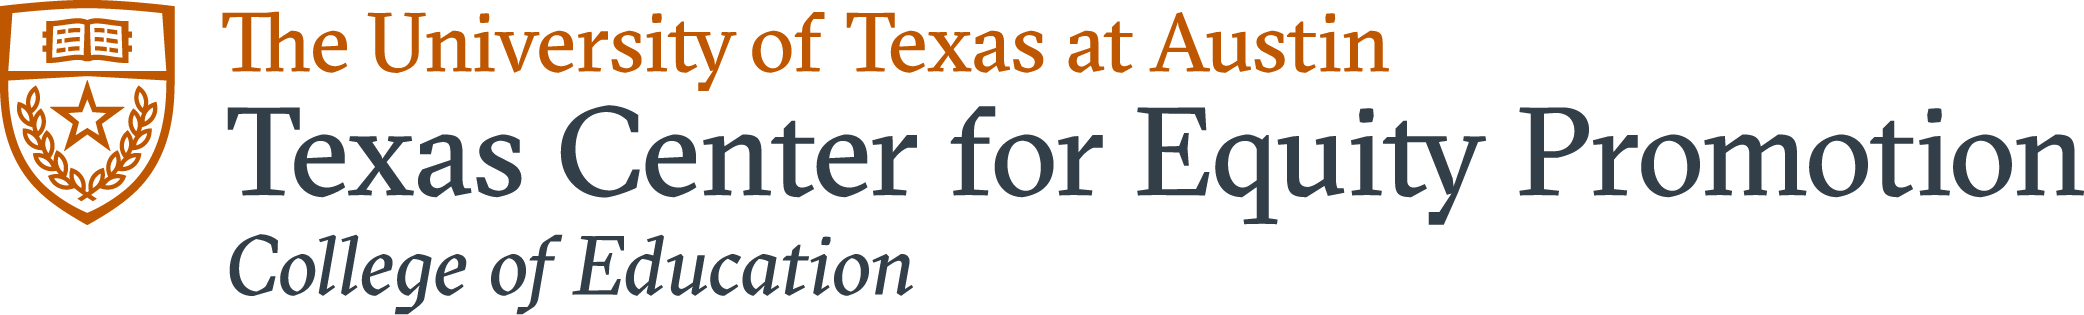 Texas Center for Equity Promotion home